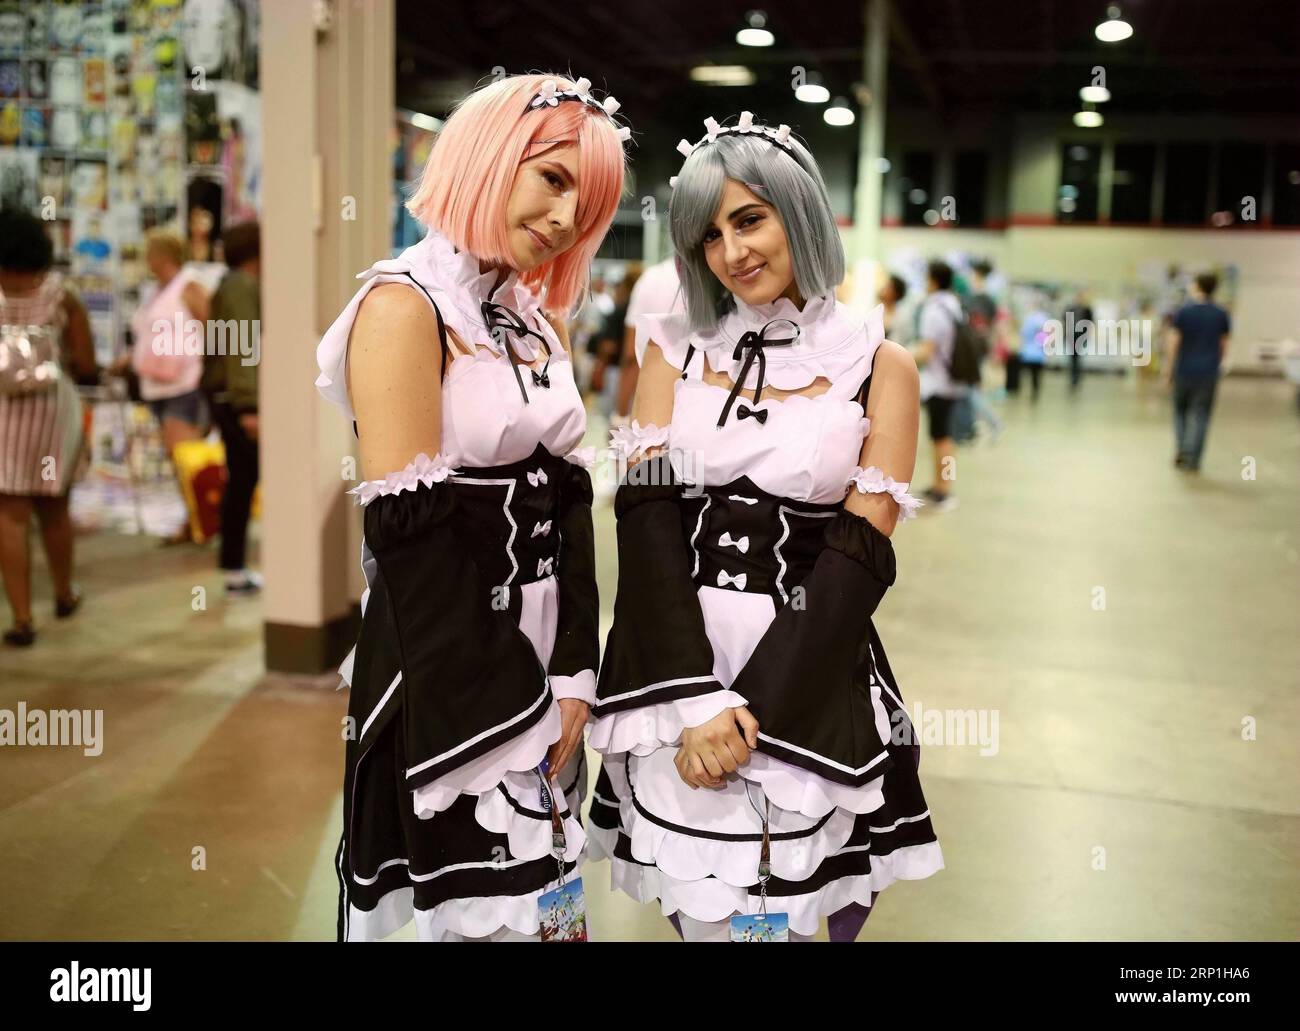 Anime Pops Up Cosplay Extravaganza Coming To Chicago. – ABNewswire